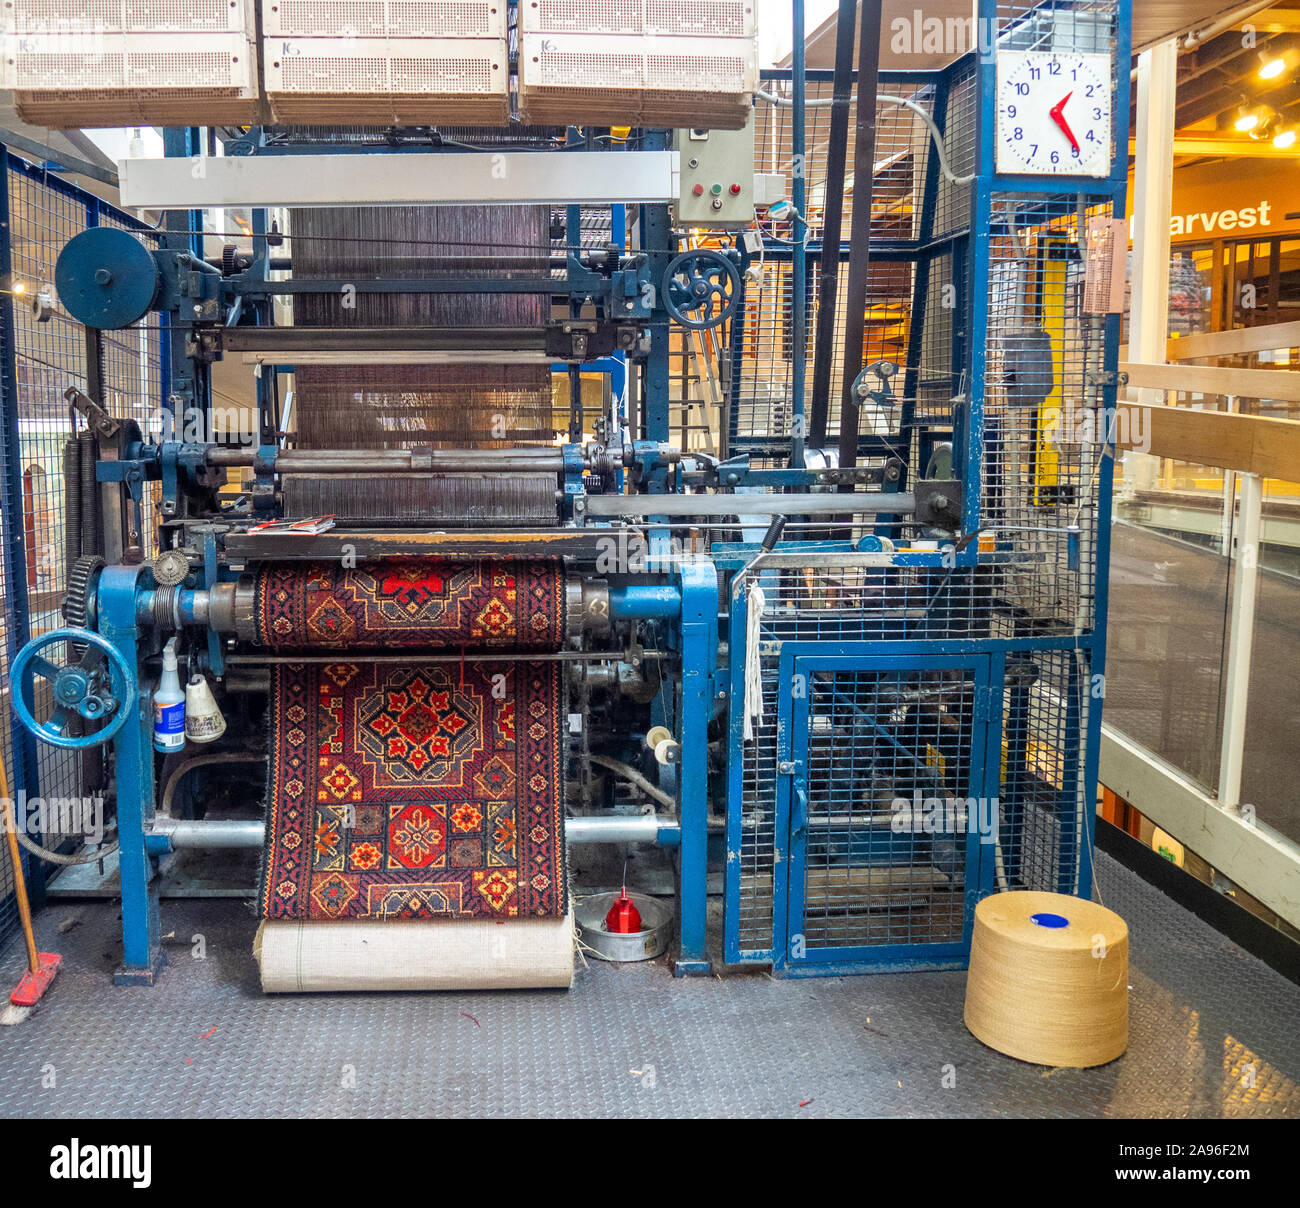 Exhibition vintage mechanical machinery Axminster gripper loom using Jacquard system at National Wool Museum Geelong Victoria Australia. Stock Photo